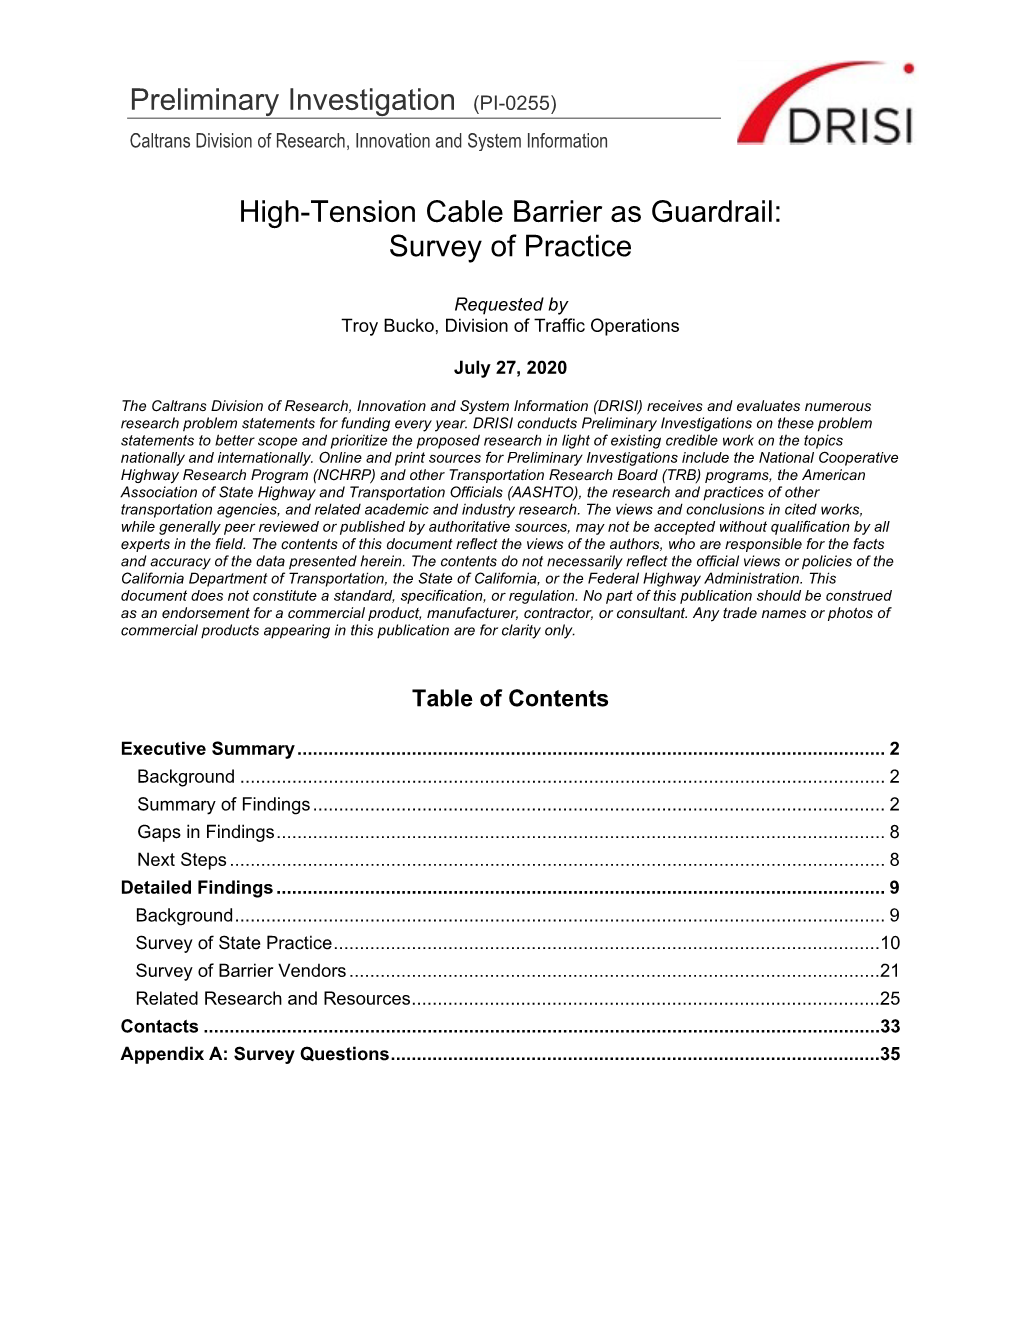 High-Tension Cable Barrier As Guardrail: Survey of Practice